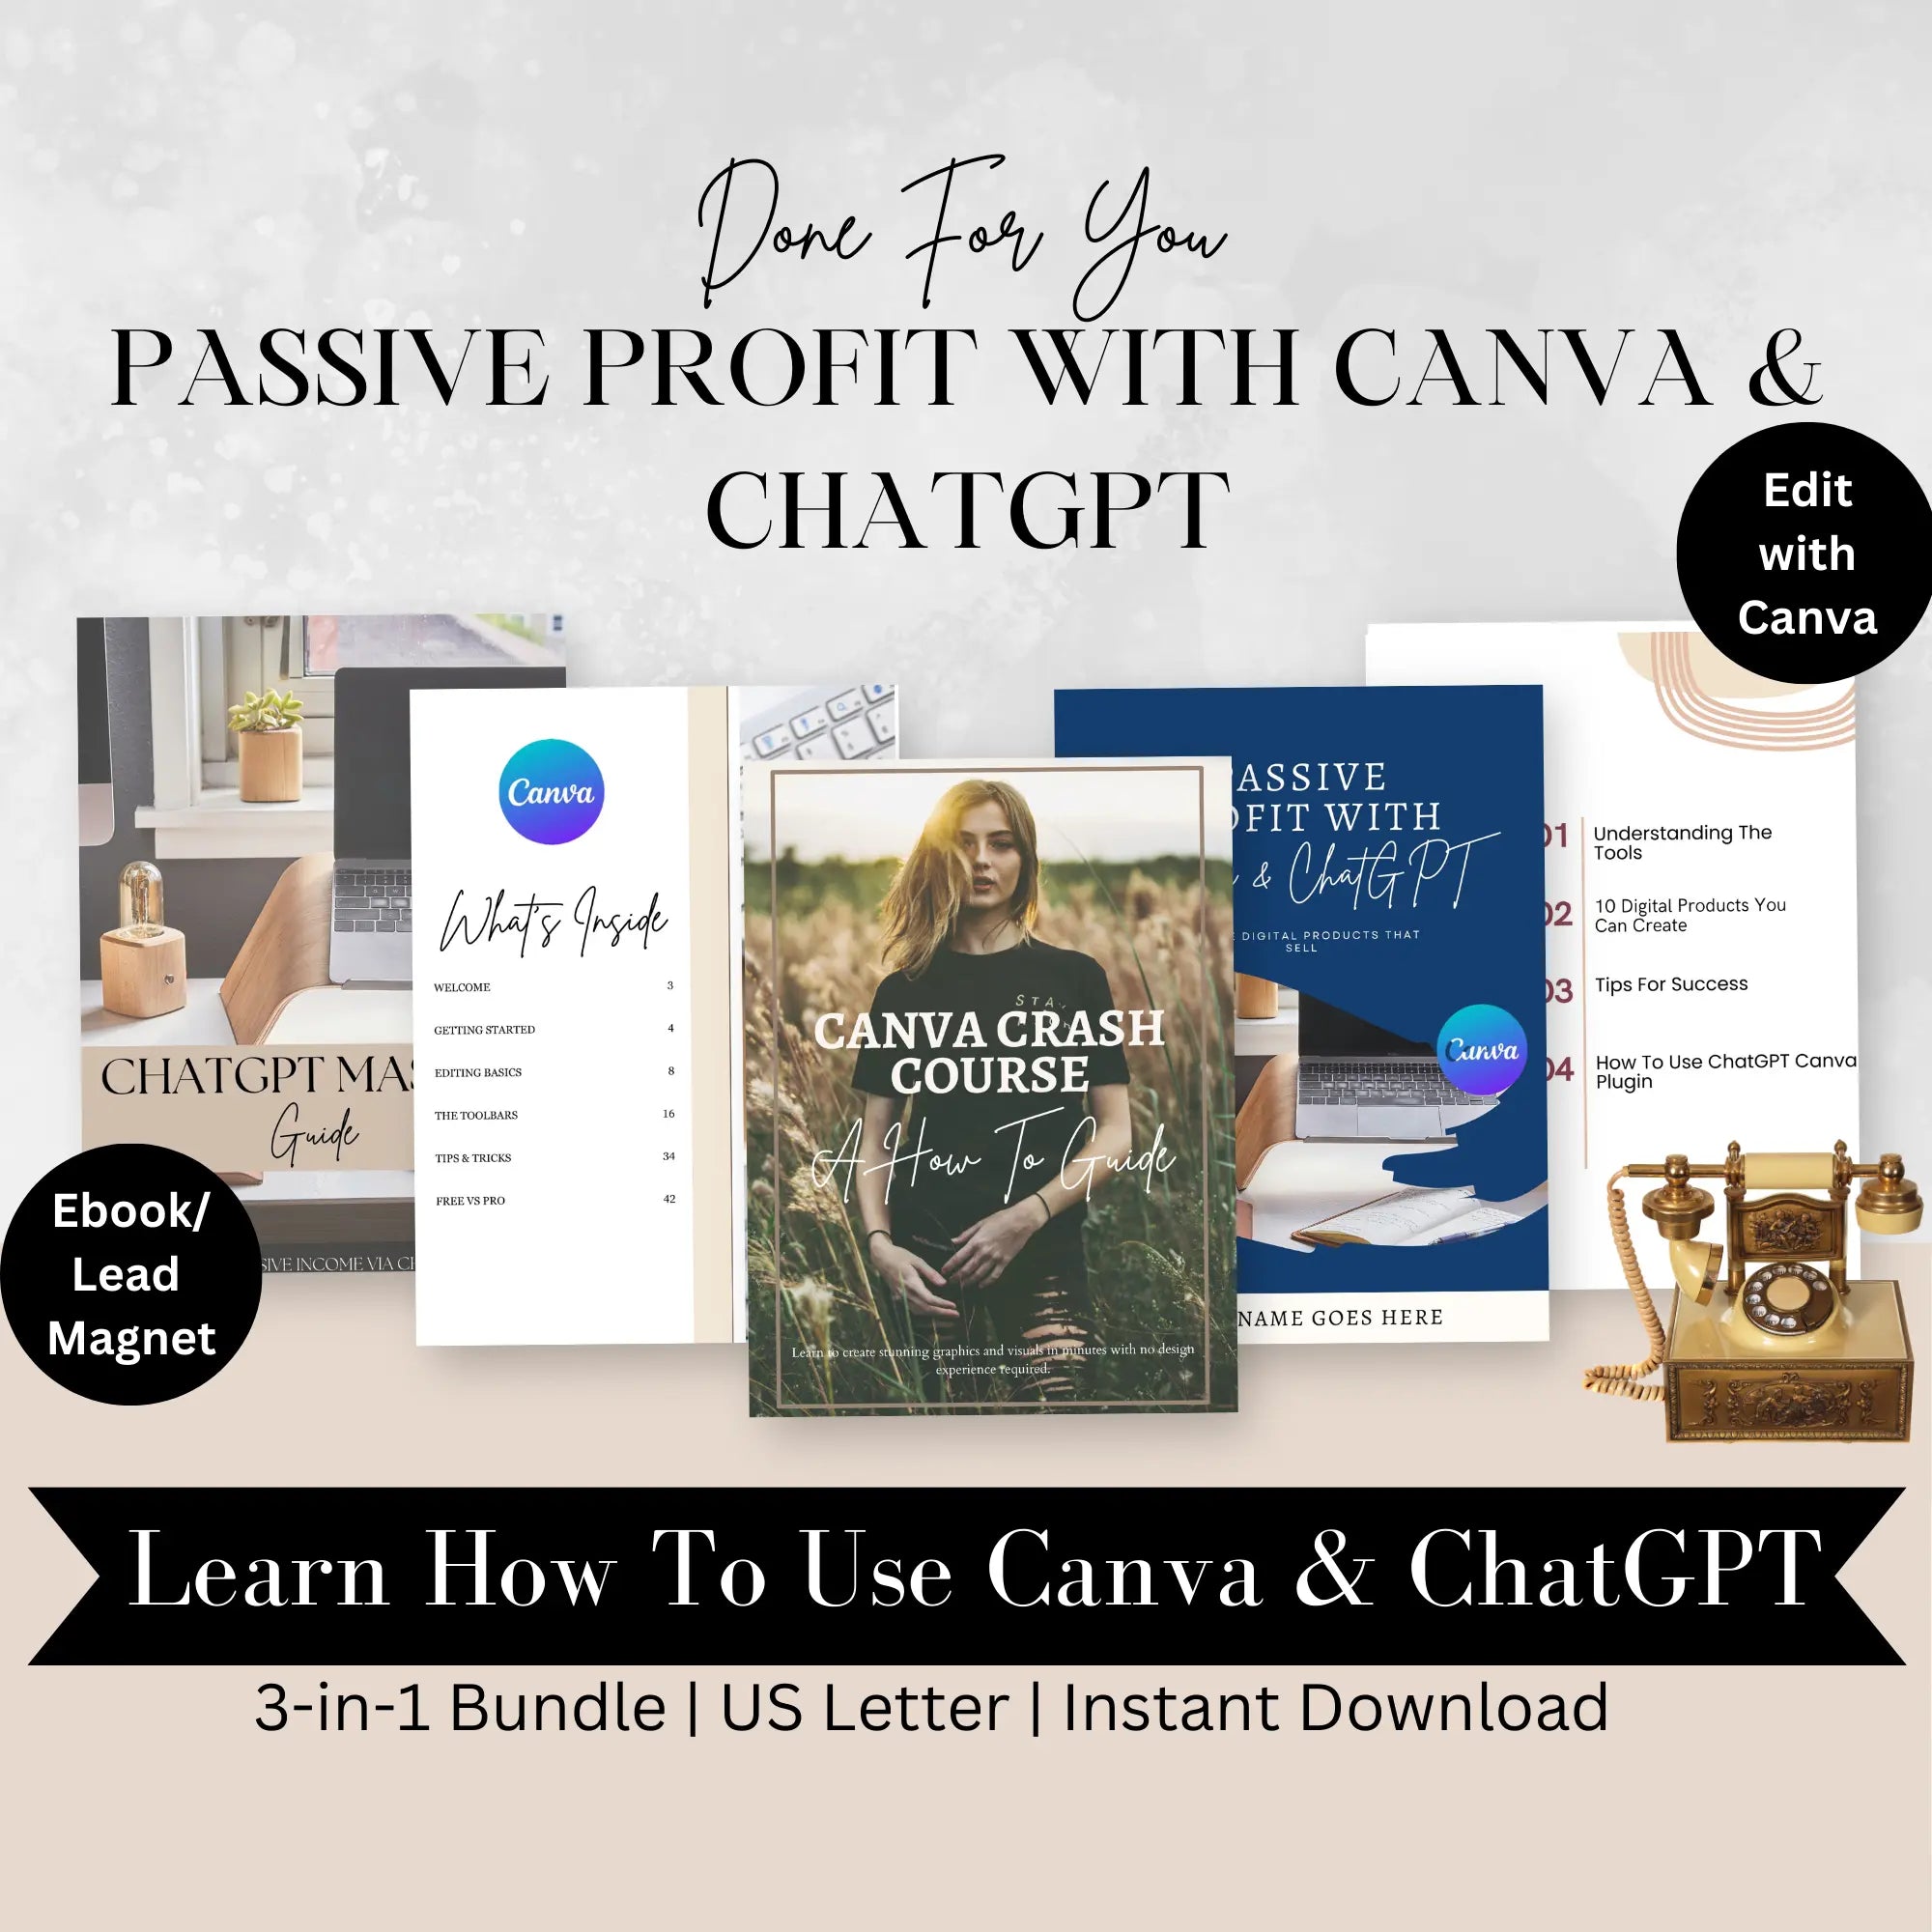 3-in-1 Bundle Passive Profit With Canva & ChatGPT Guide